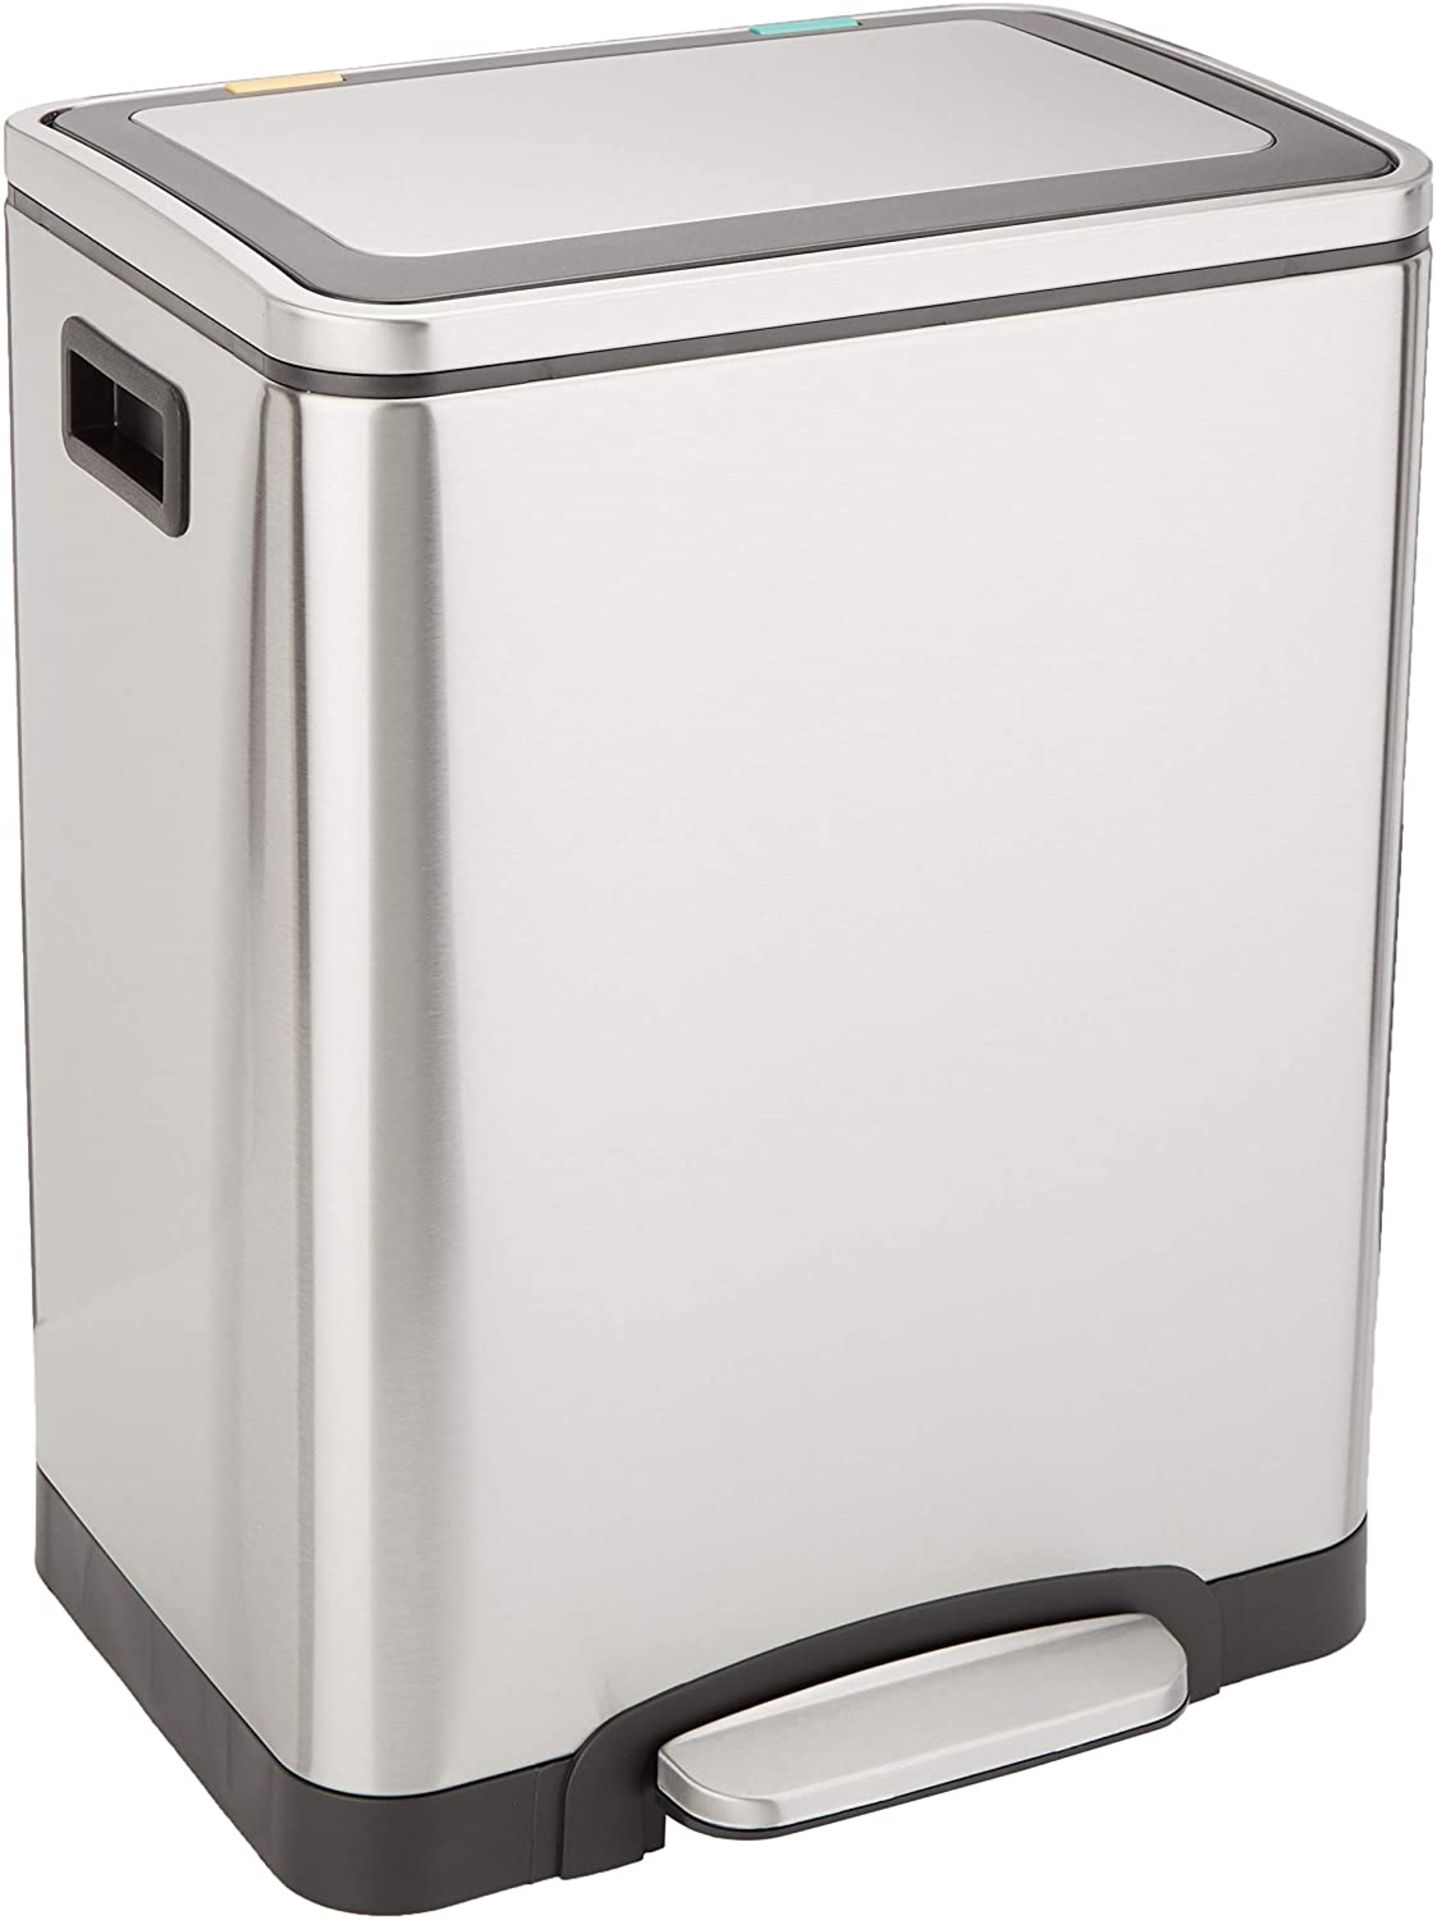 AmazonBasics Stainless Steel Dustbin with Two 15 L Interior Bins - 2x15L